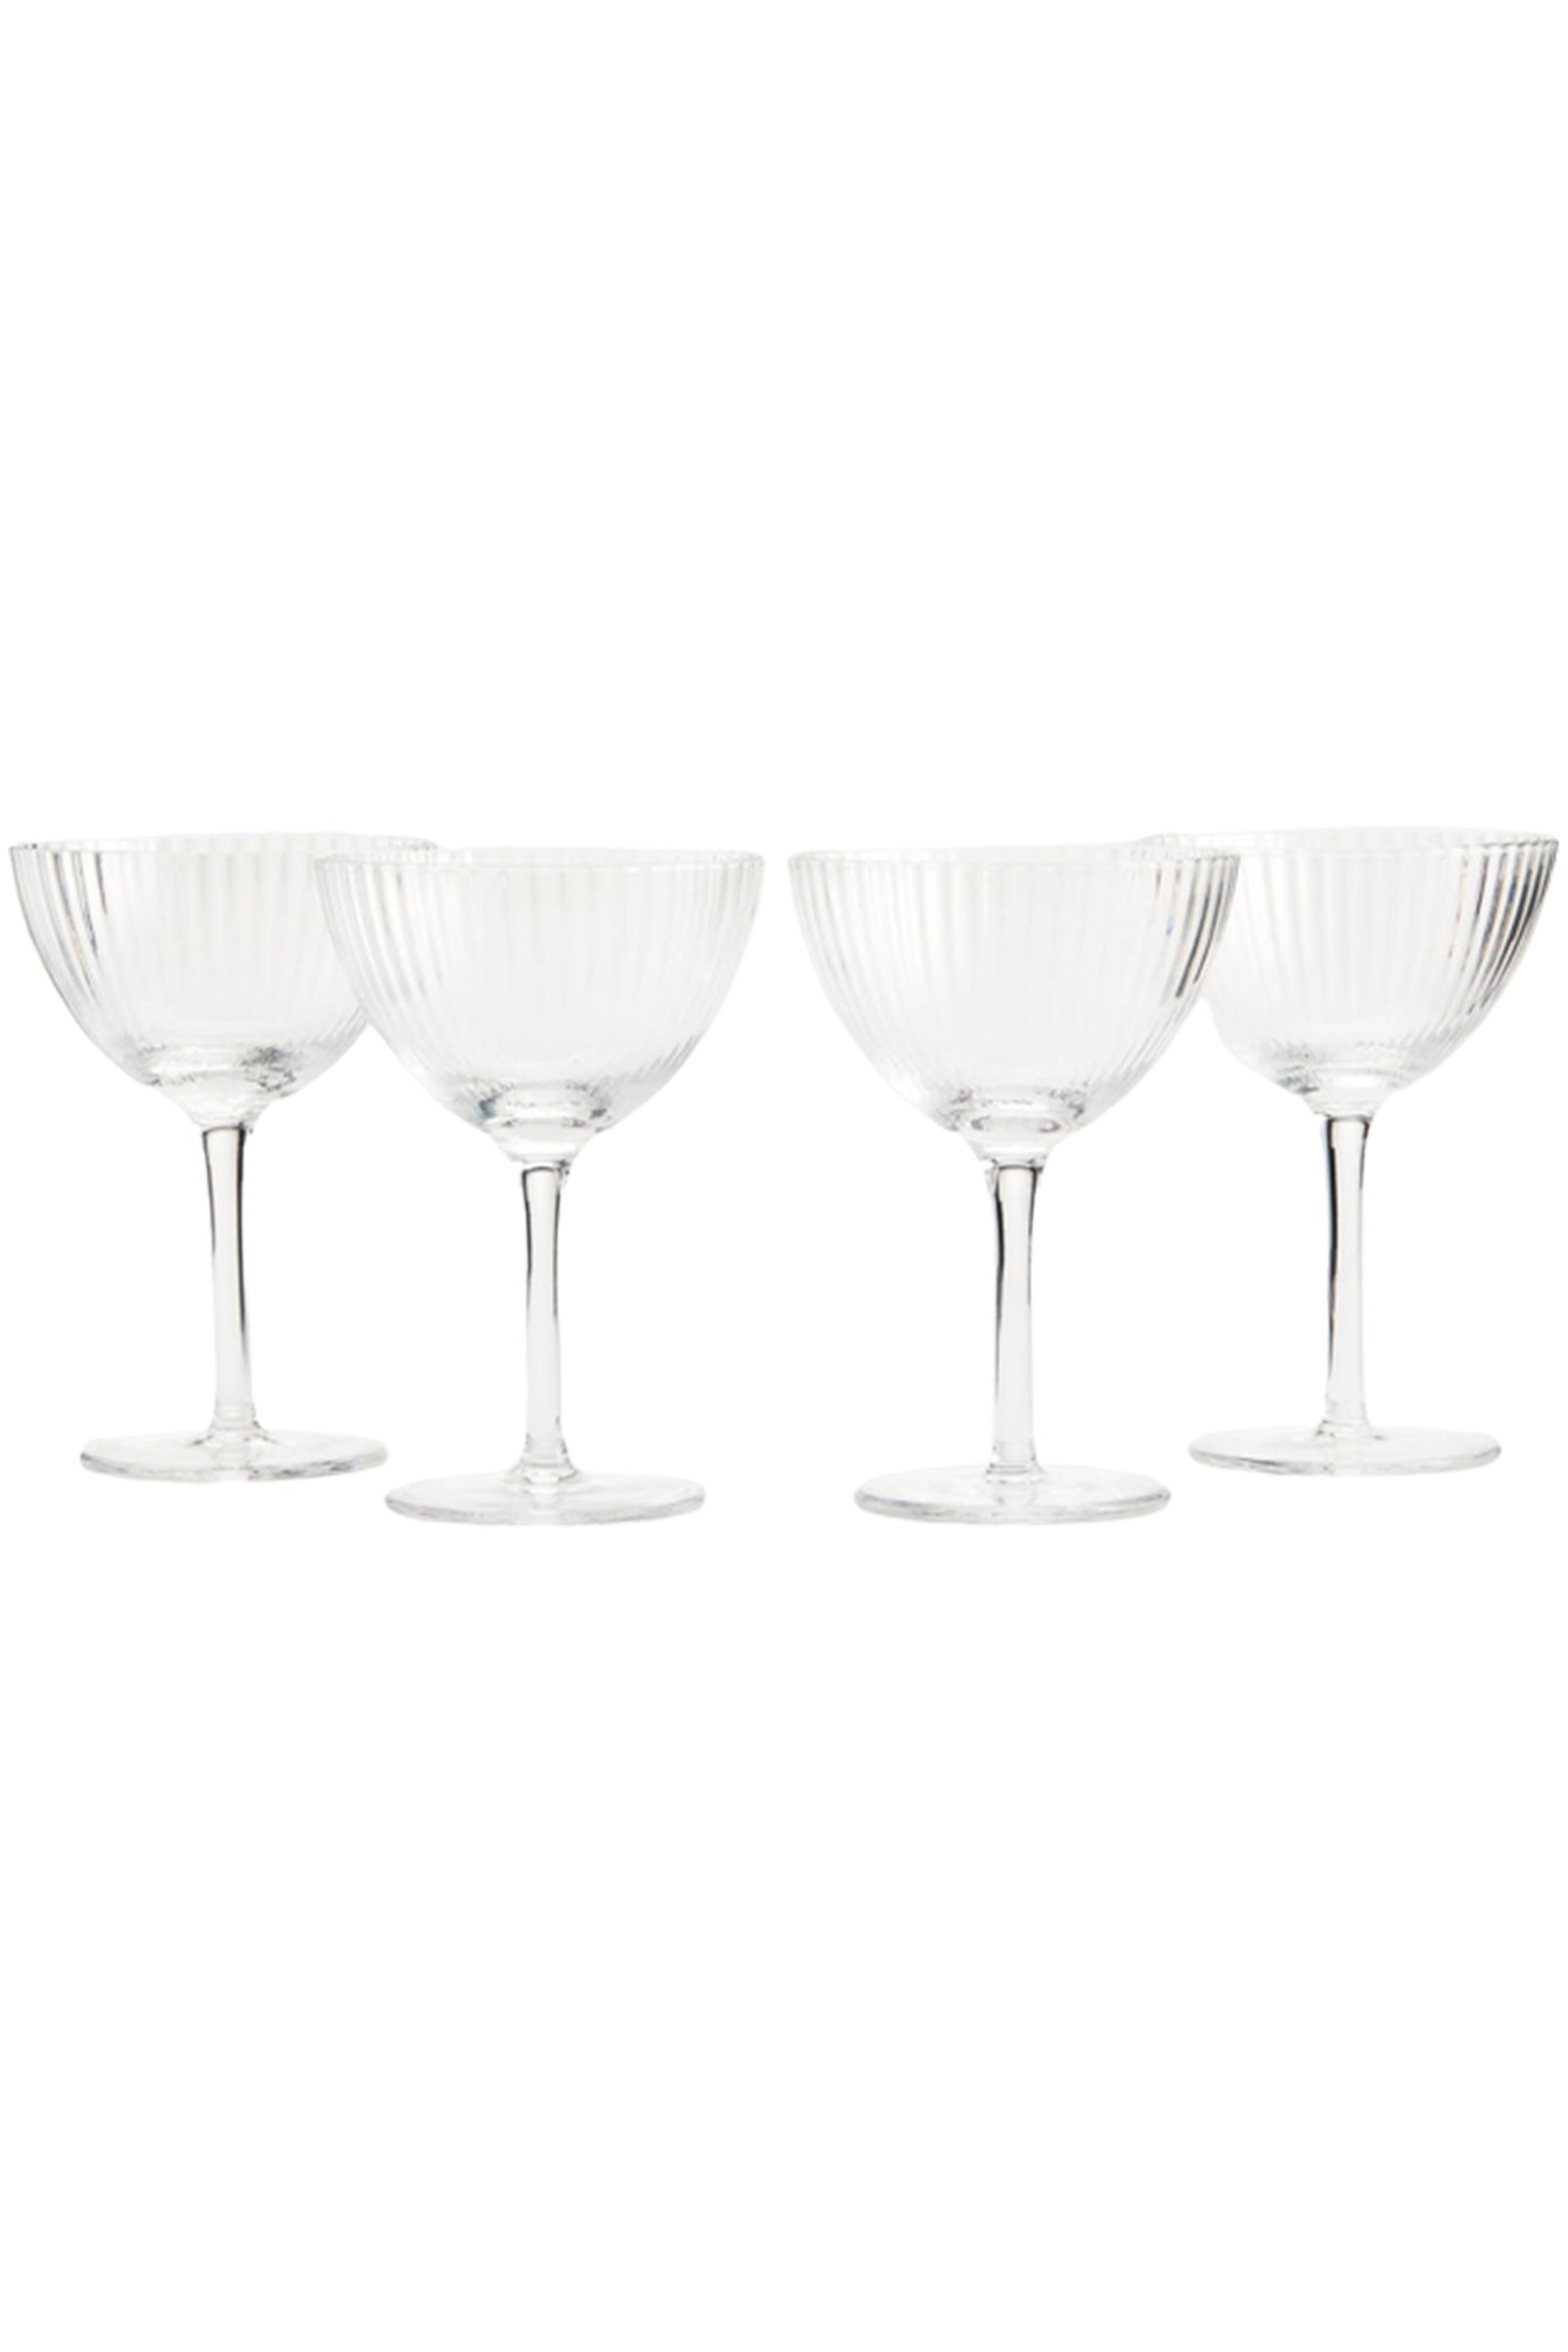 https://cdn.shopify.com/s/files/1/0732/8278/1488/products/soho-home-luted-Champagne-Coupe-Set-of-Four.jpg?v=1681841006